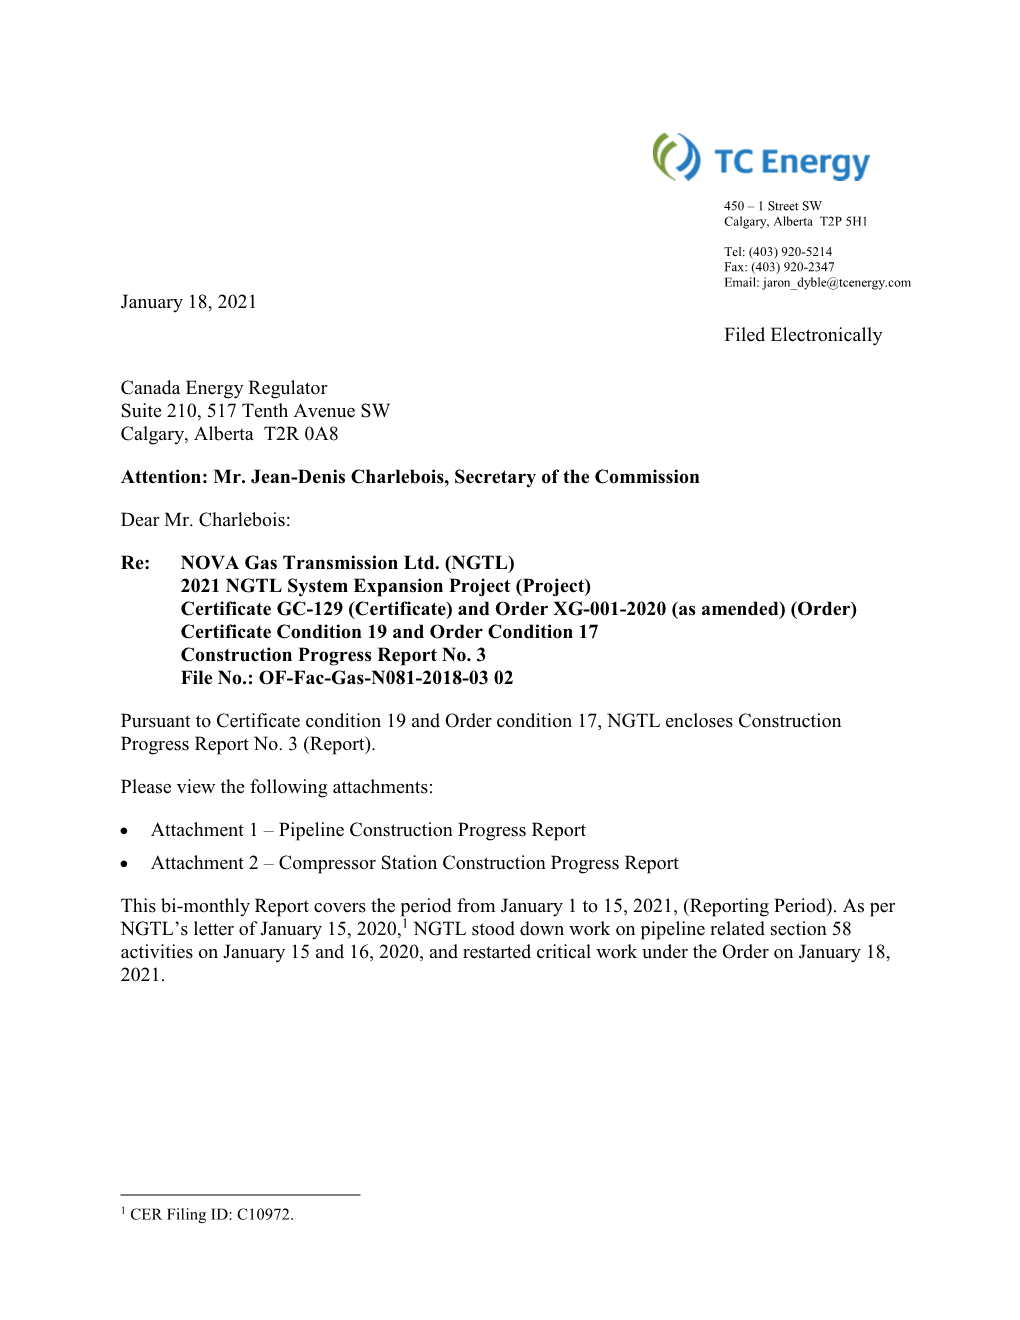 January 18, 2021 Filed Electronically Canada Energy Regulator Suite 210, 517 Tenth Avenue SW Calgary, Alberta T2R 0A8 Attention